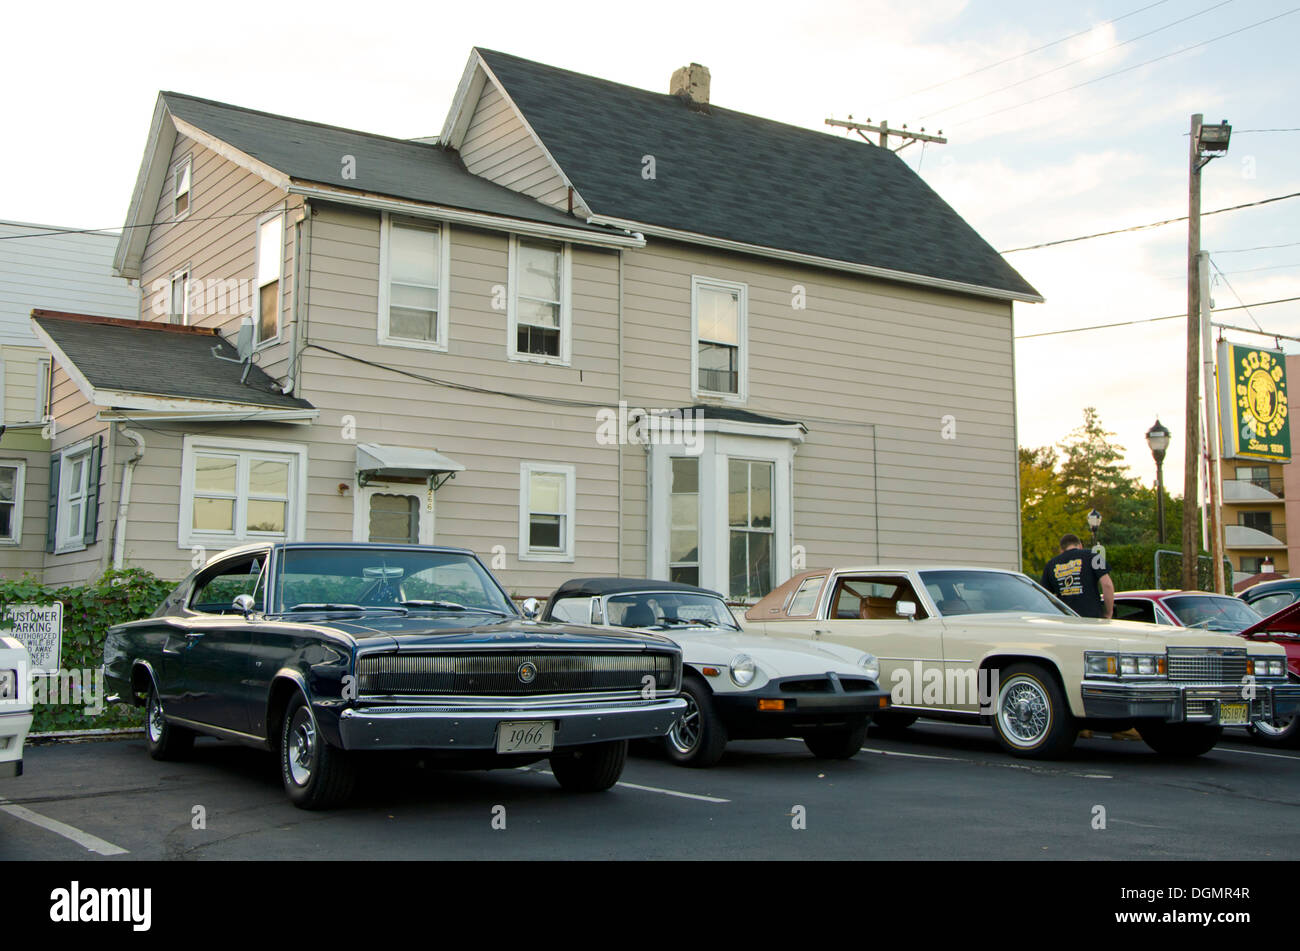 1966 Dodge Charger, Mg and classic Cadillac in front of house in New Jersey, USA. Stock Photo